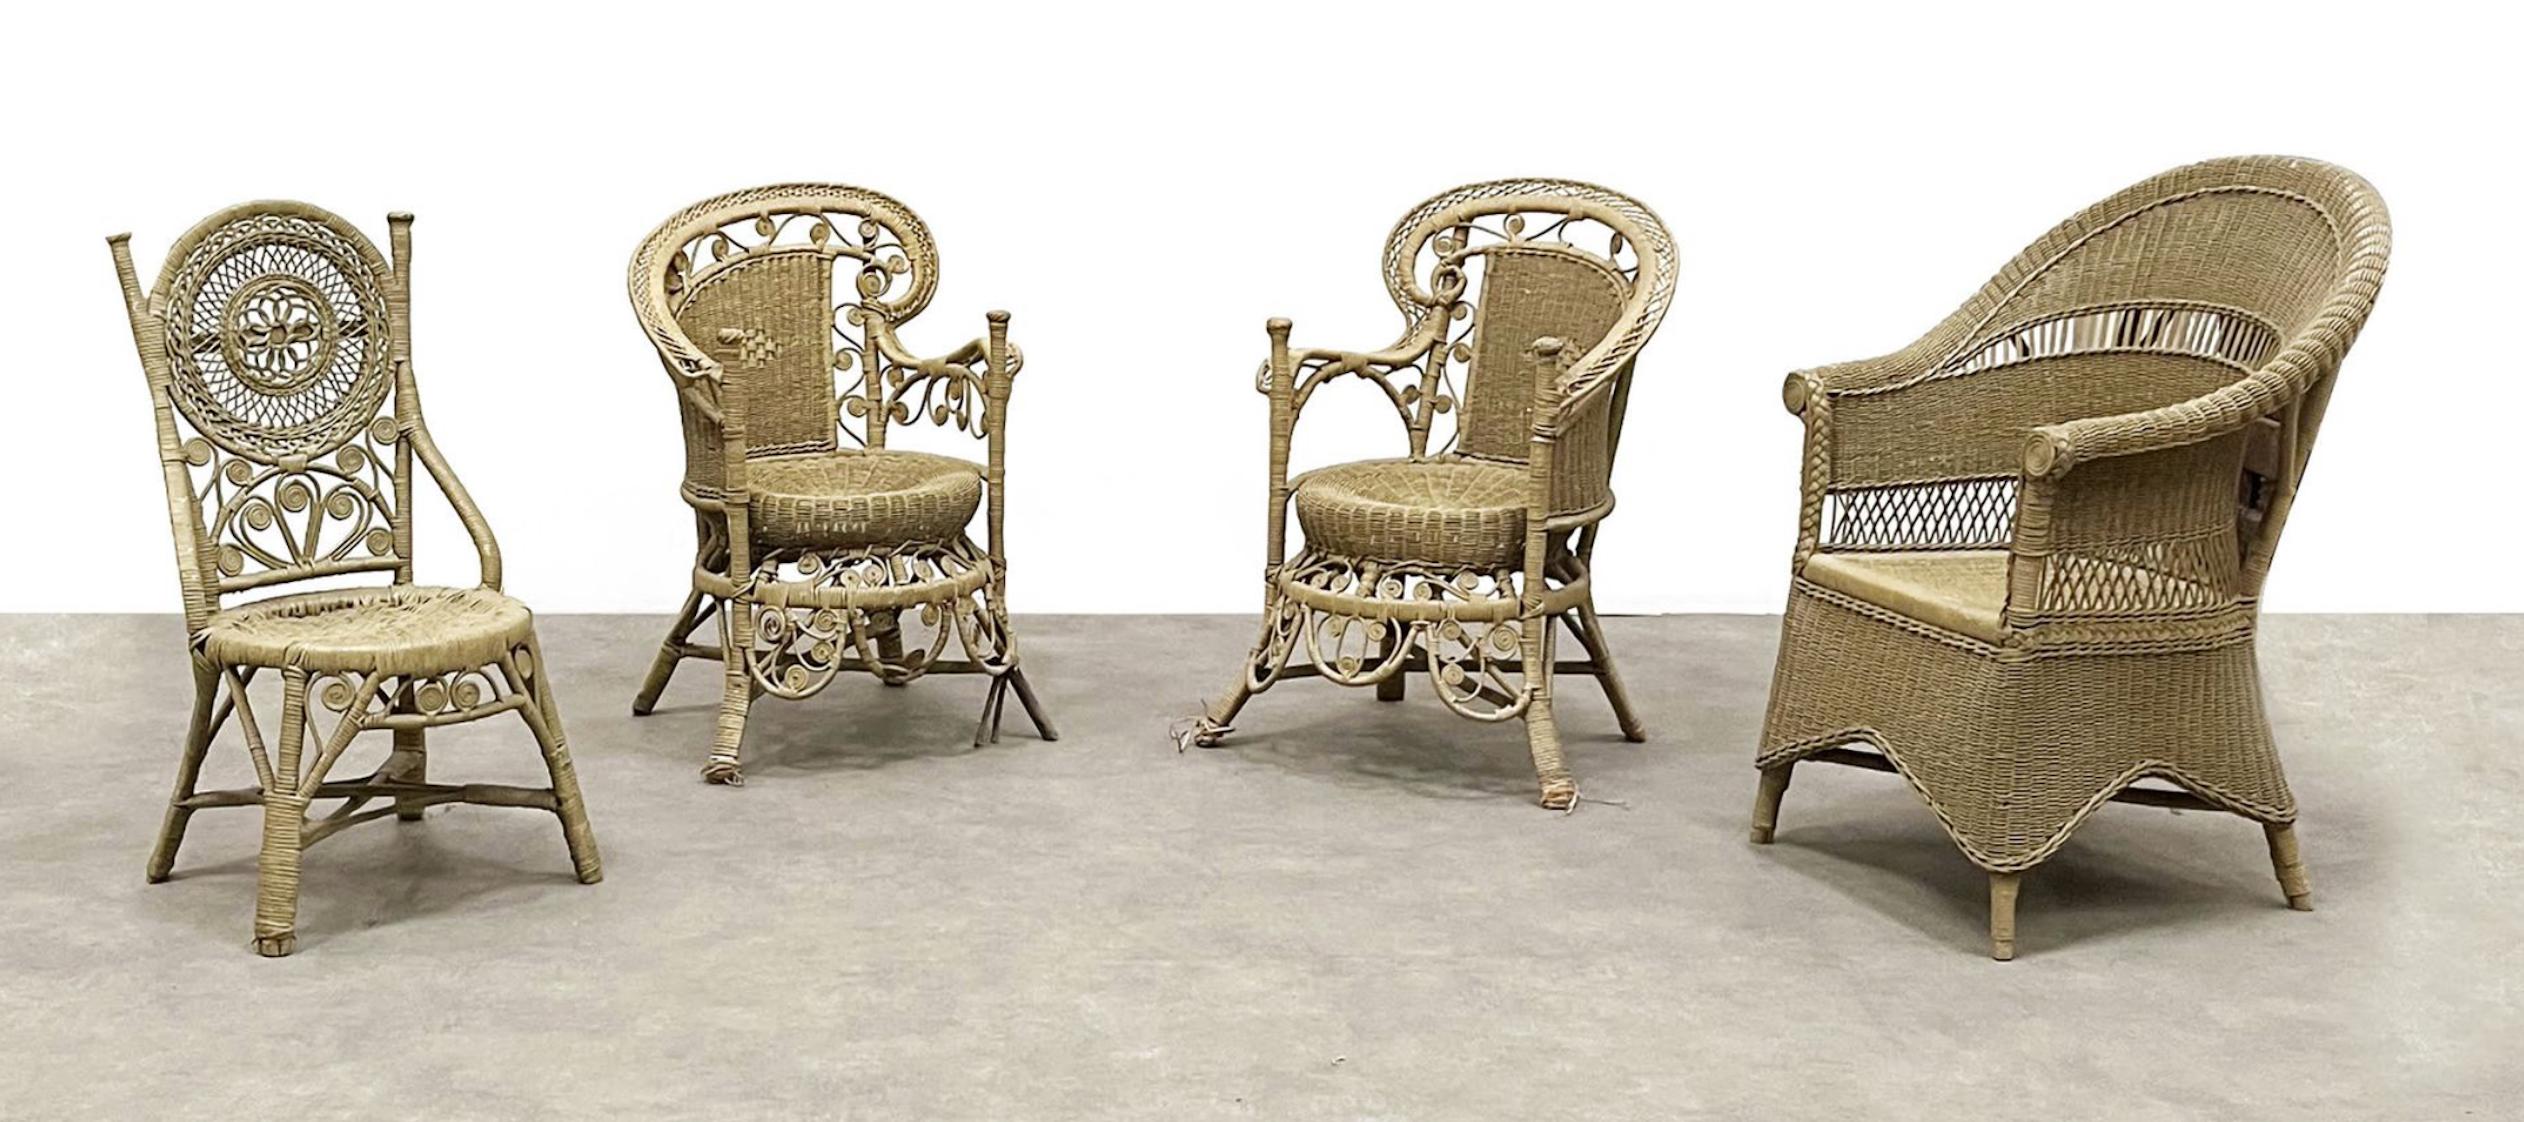 Four different garden chairs made in cane having different shapes and structures.
Authentic good condition with no restorations made.
France, circa 1920.